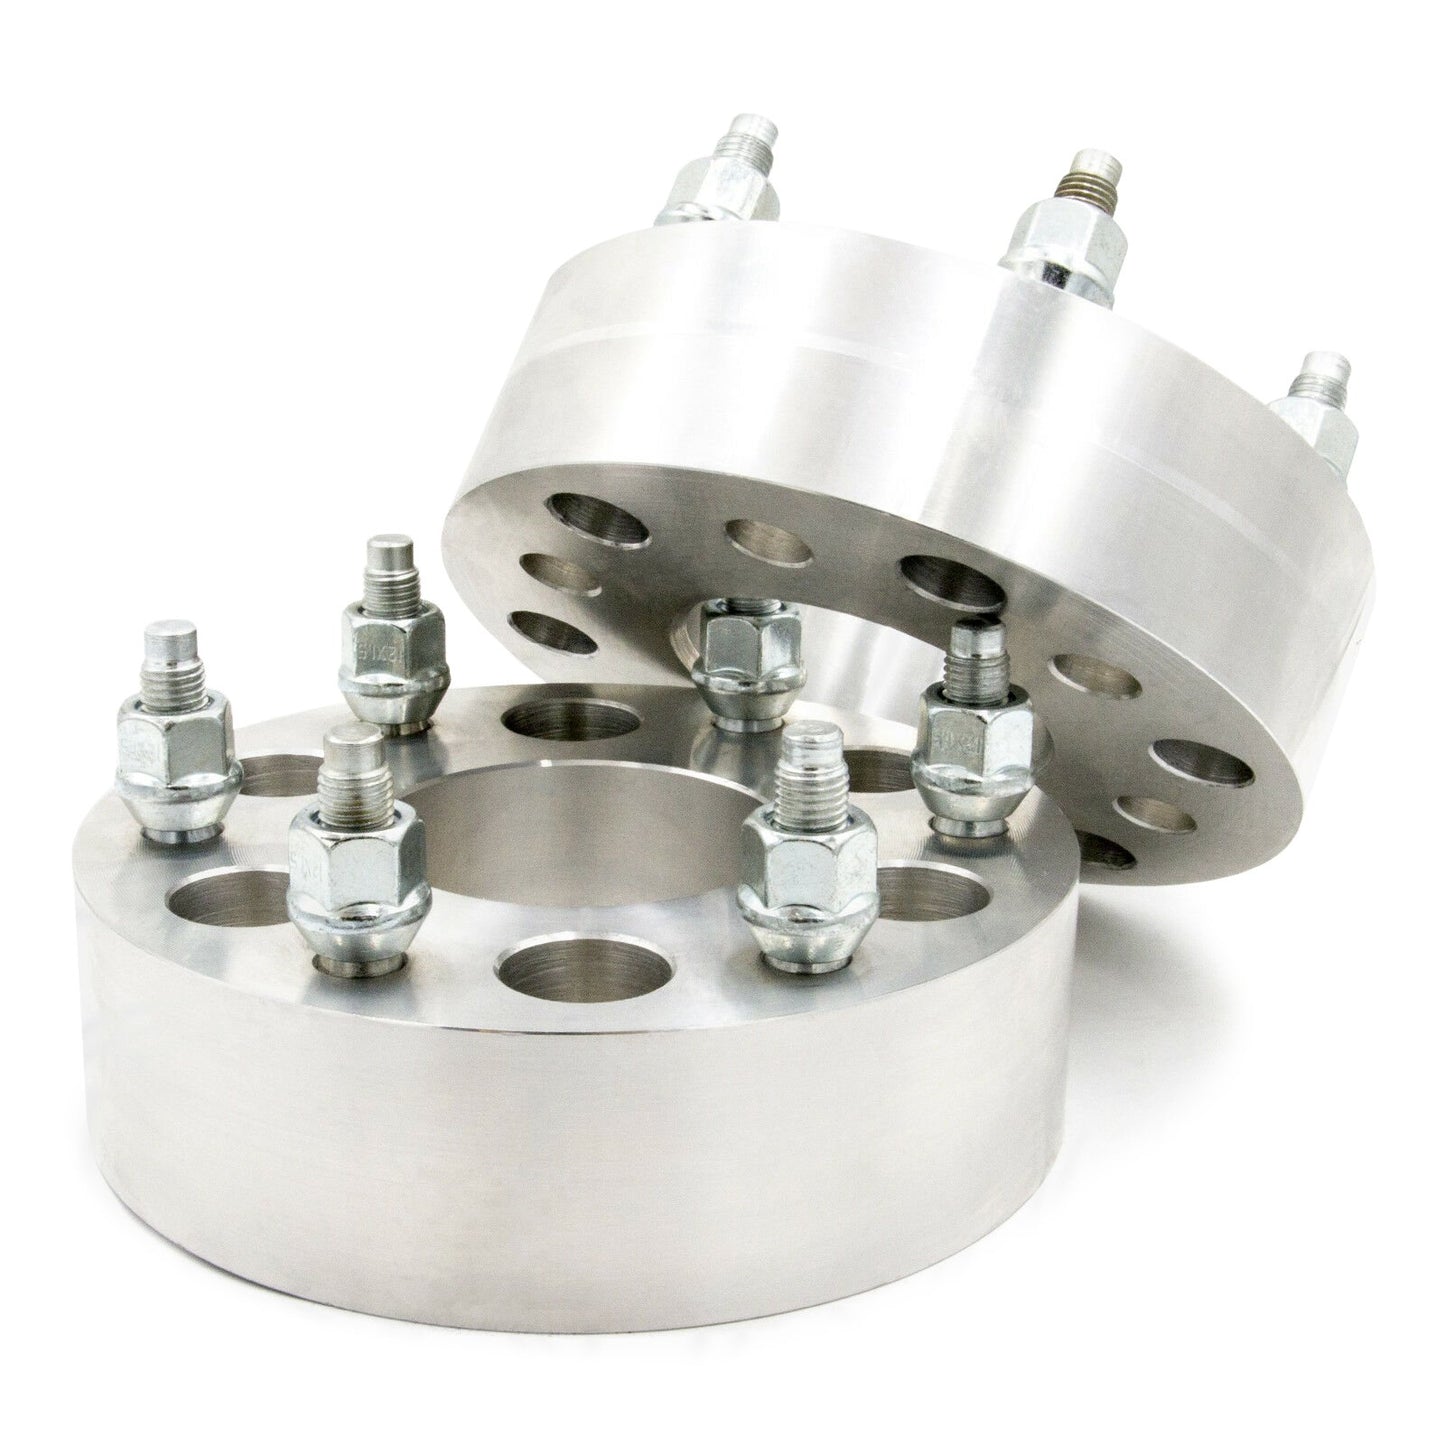 6x132 to 6x132 Wheel Spacer/Adapter - Thickness: 3/4"- 4"